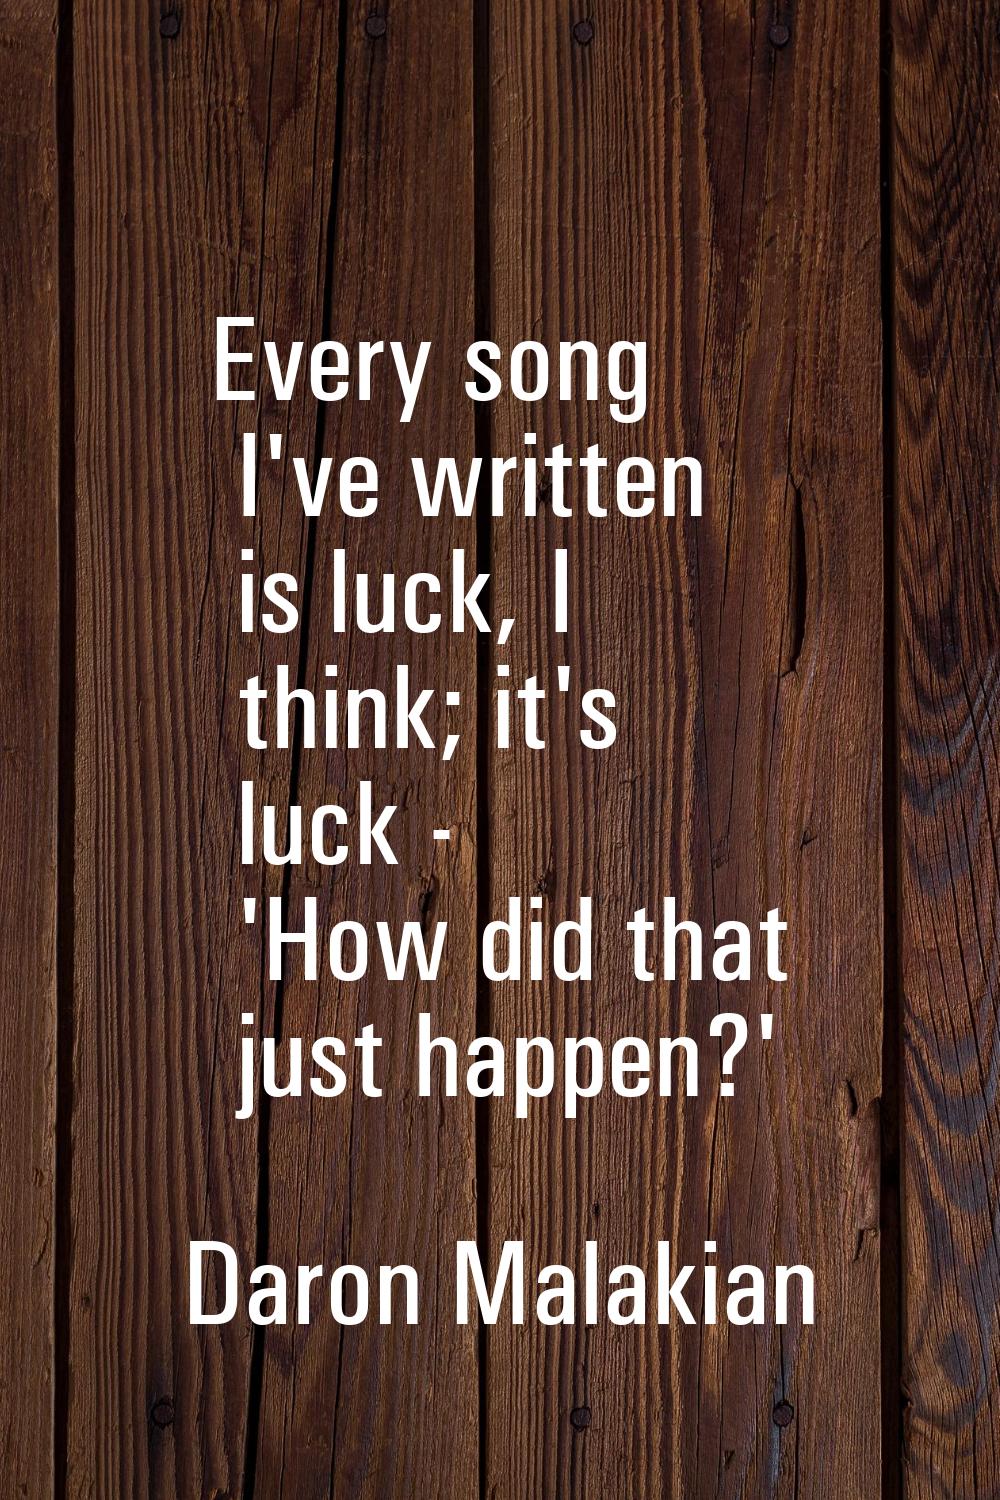 Every song I've written is luck, I think; it's luck - 'How did that just happen?'